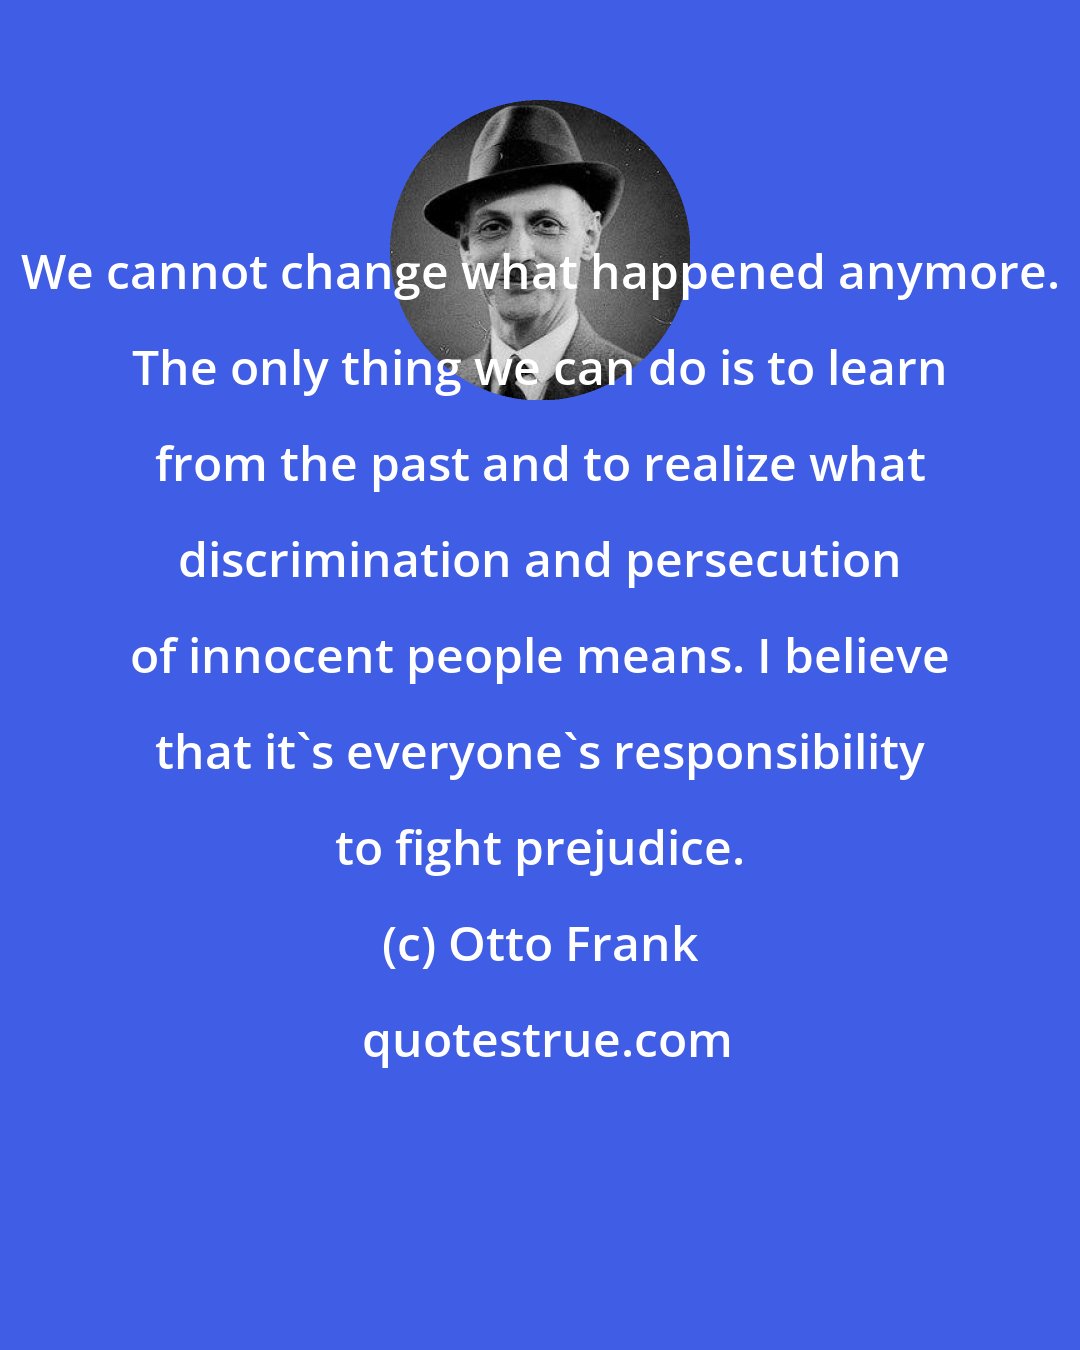 Otto Frank: We cannot change what happened anymore. The only thing we can do is to learn from the past and to realize what discrimination and persecution of innocent people means. I believe that it's everyone's responsibility to fight prejudice.